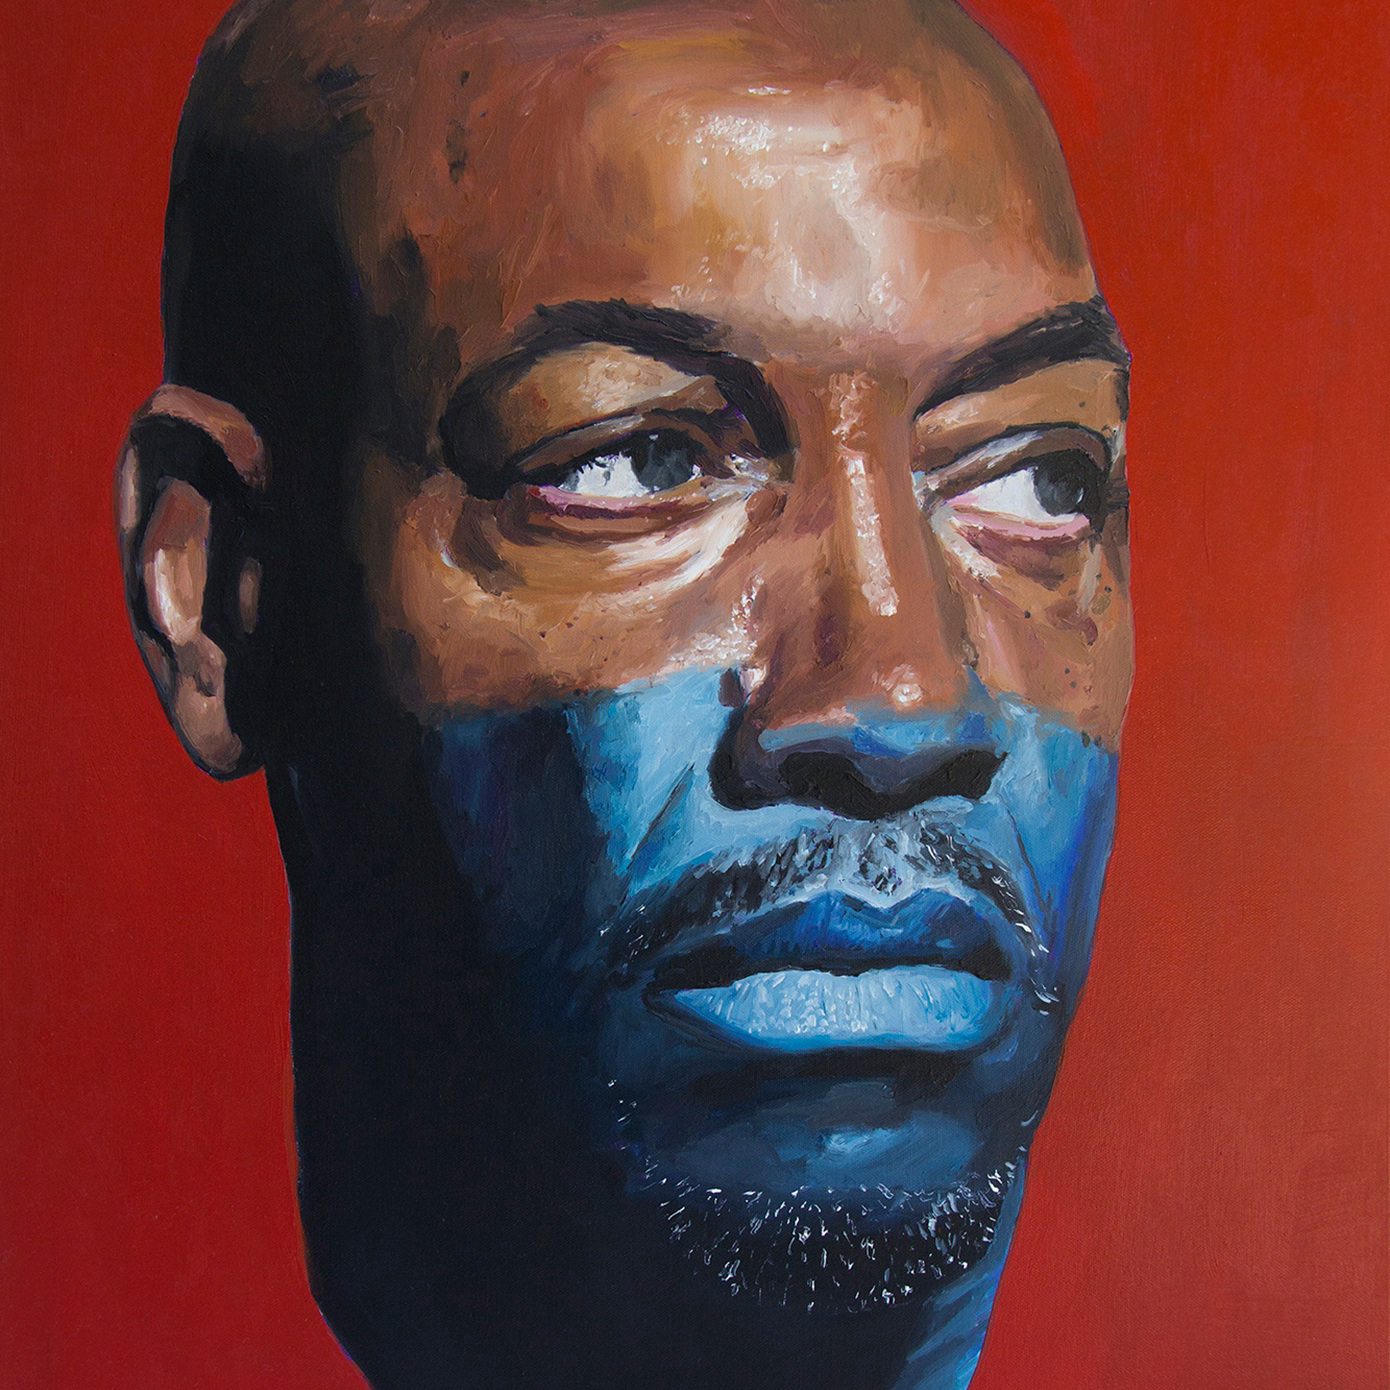 William Paul Thomas Pursues Identity, Anonymity in his Blue and Black Portraits